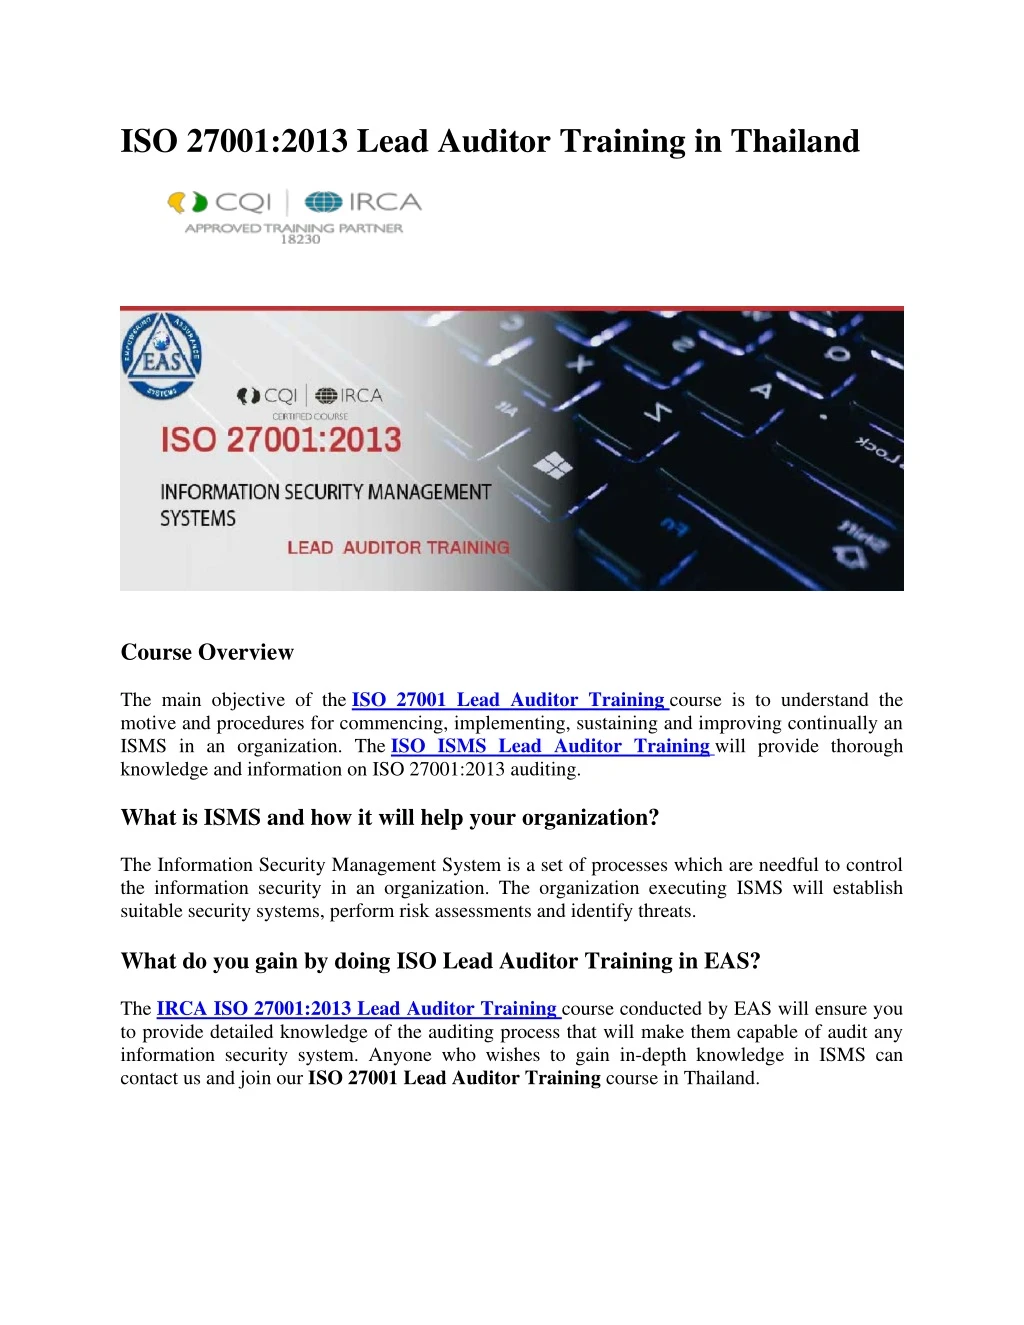 iso 27001 2013 lead auditor training in thailand